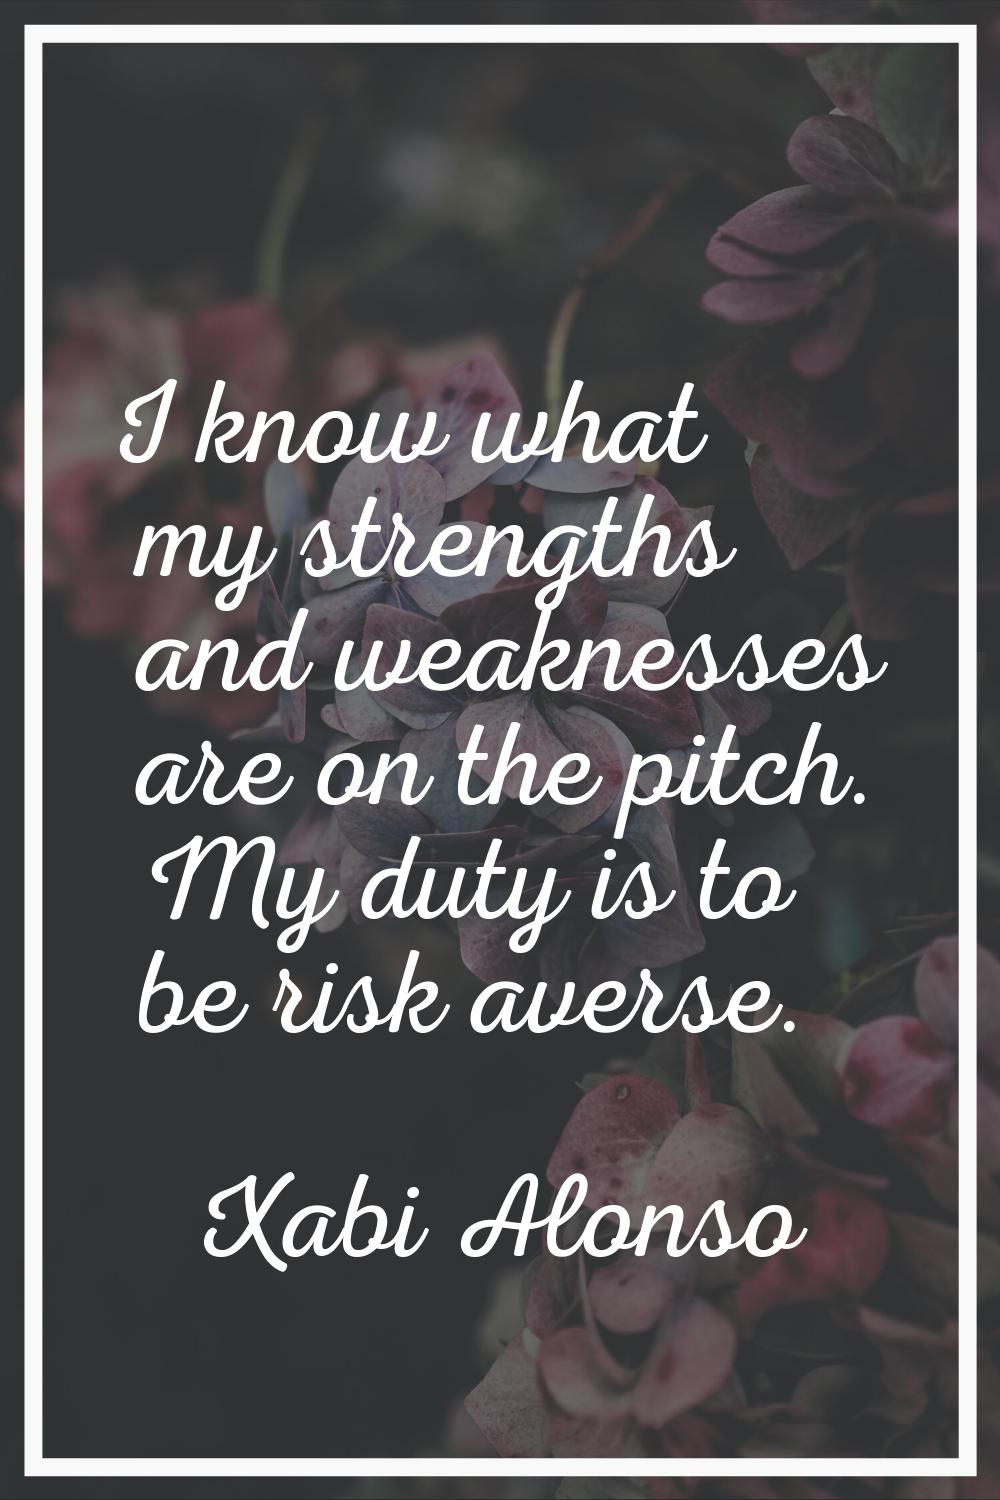 I know what my strengths and weaknesses are on the pitch. My duty is to be risk averse.